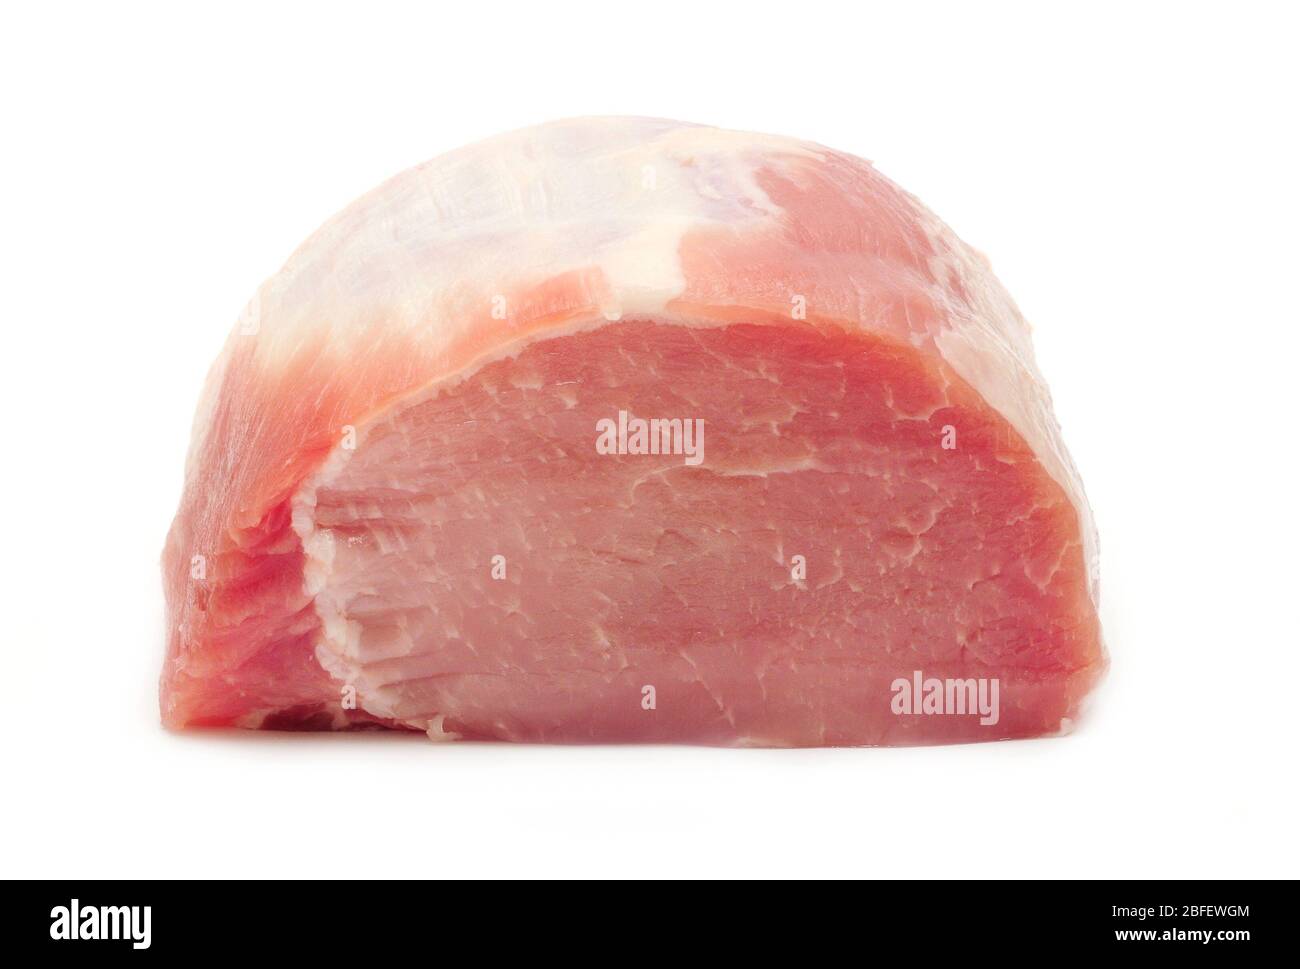 Whole piece of fresh raw pork loin over white background. Stock Photo